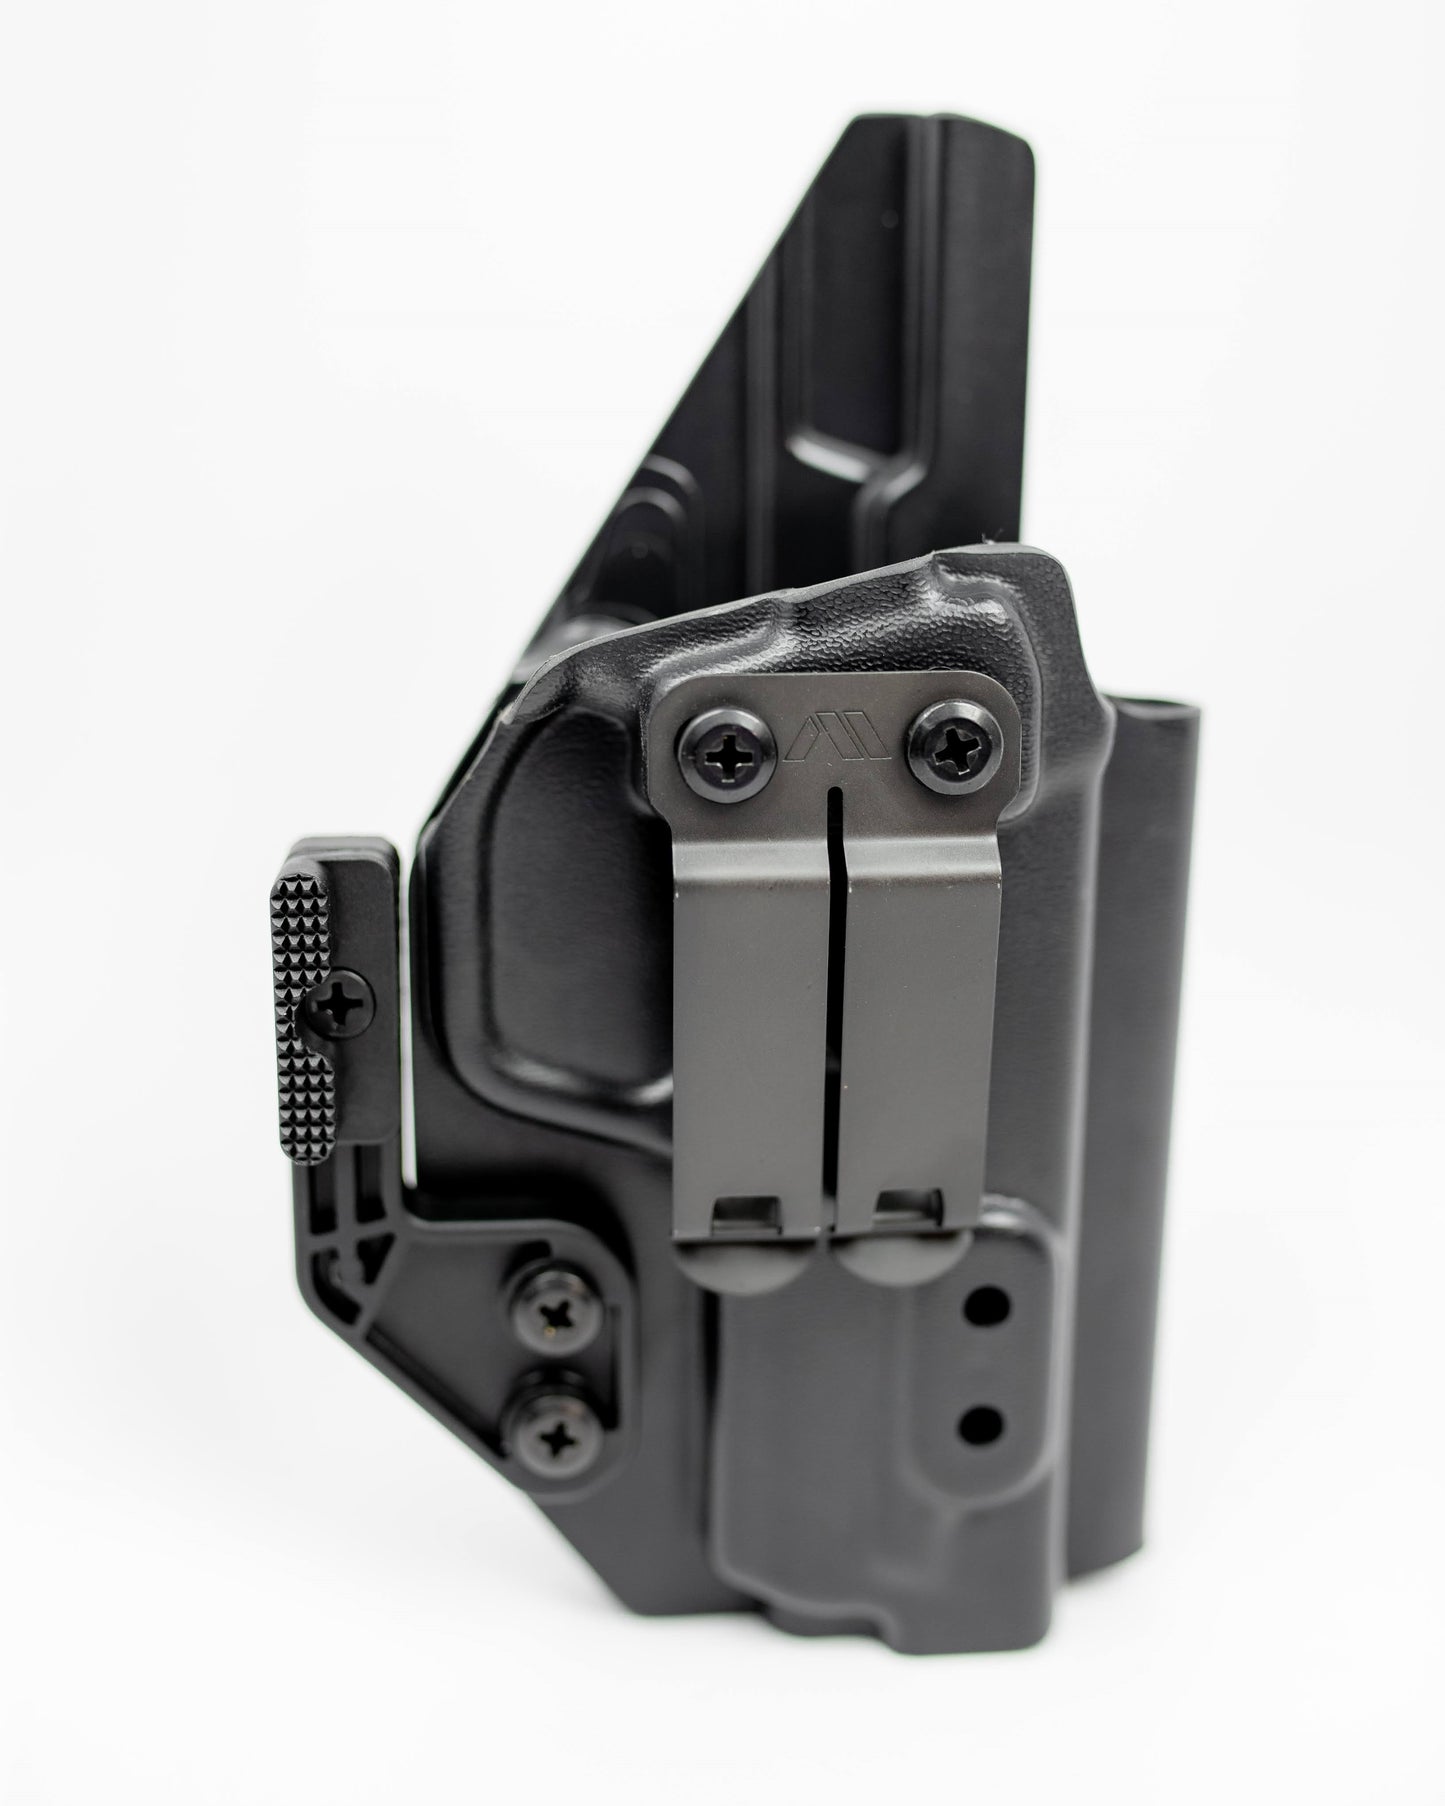 Smith and Wesson M&P IWB Holster